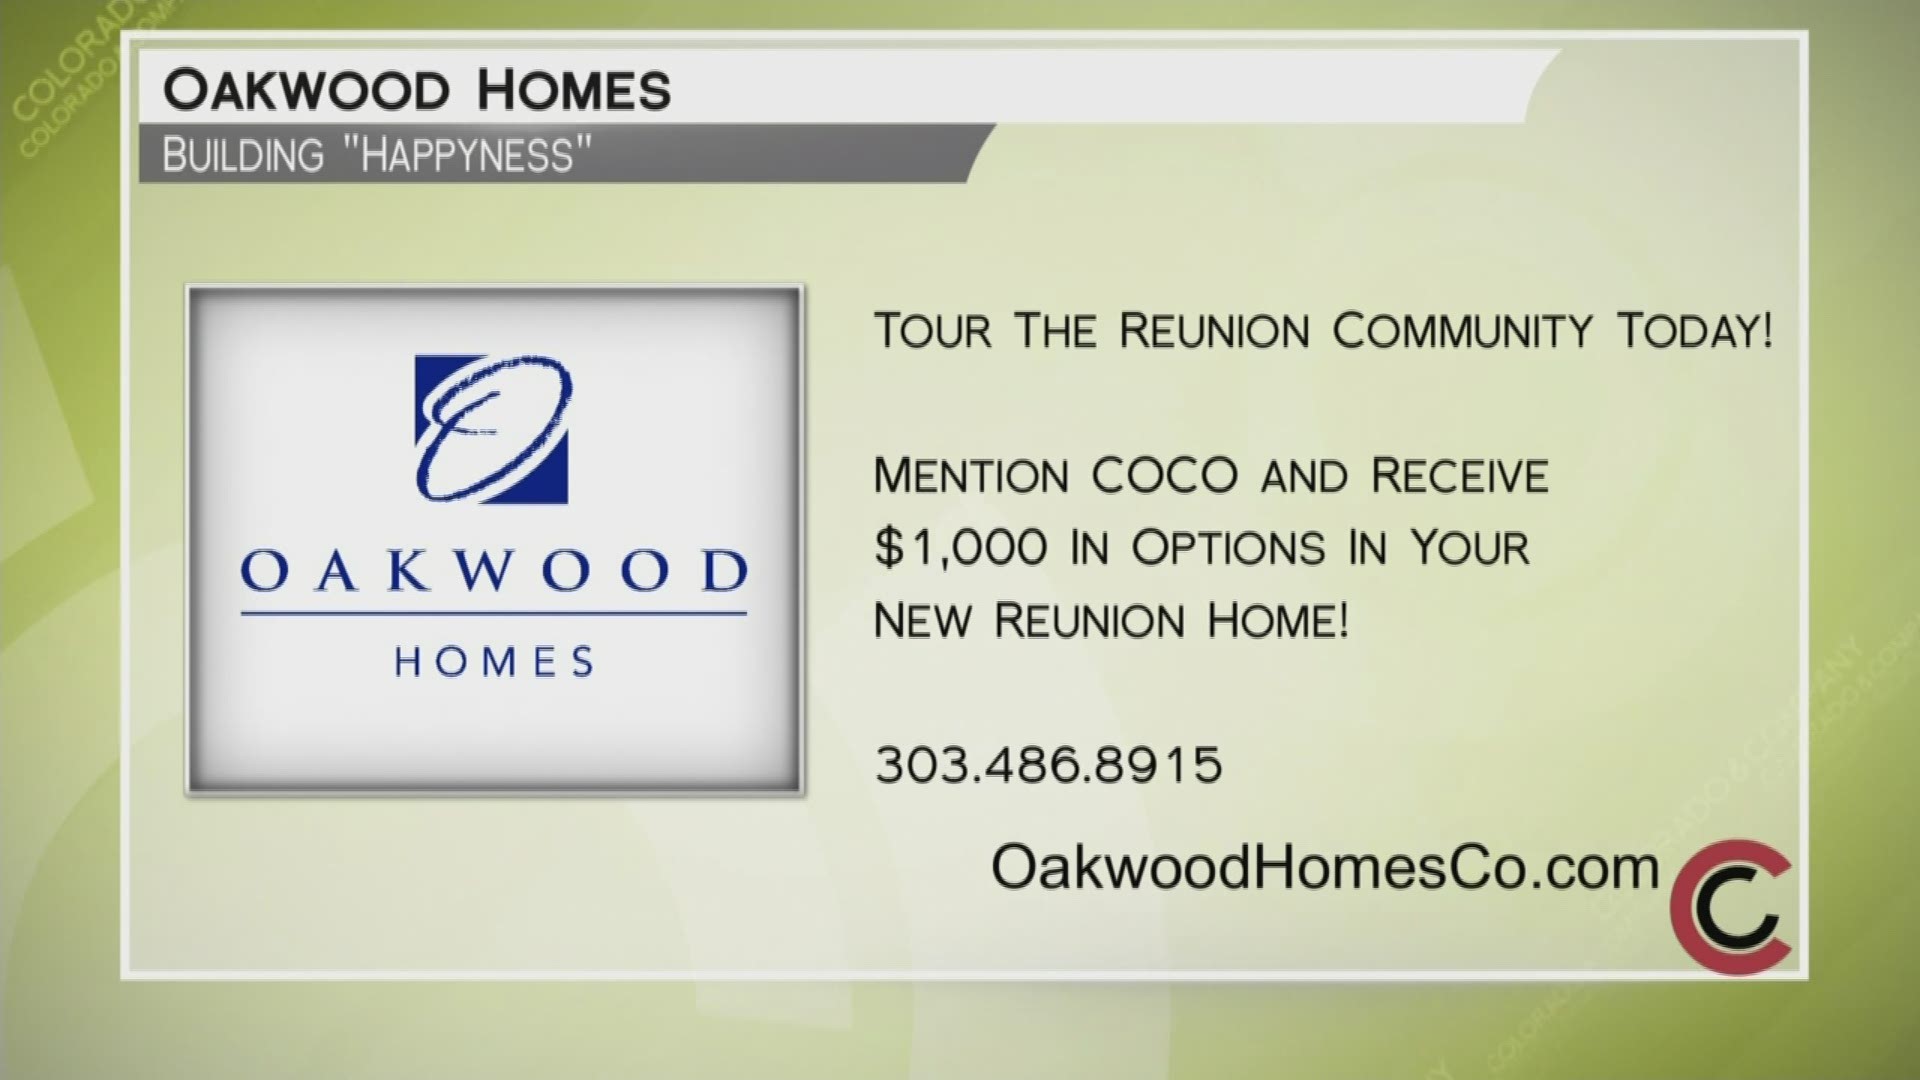 Tour the Oakwood Homes Community in Reunion! Call 303.486.8915 to schedule your appointment. Learn more about their communities at OakwoodHomesCO.com.